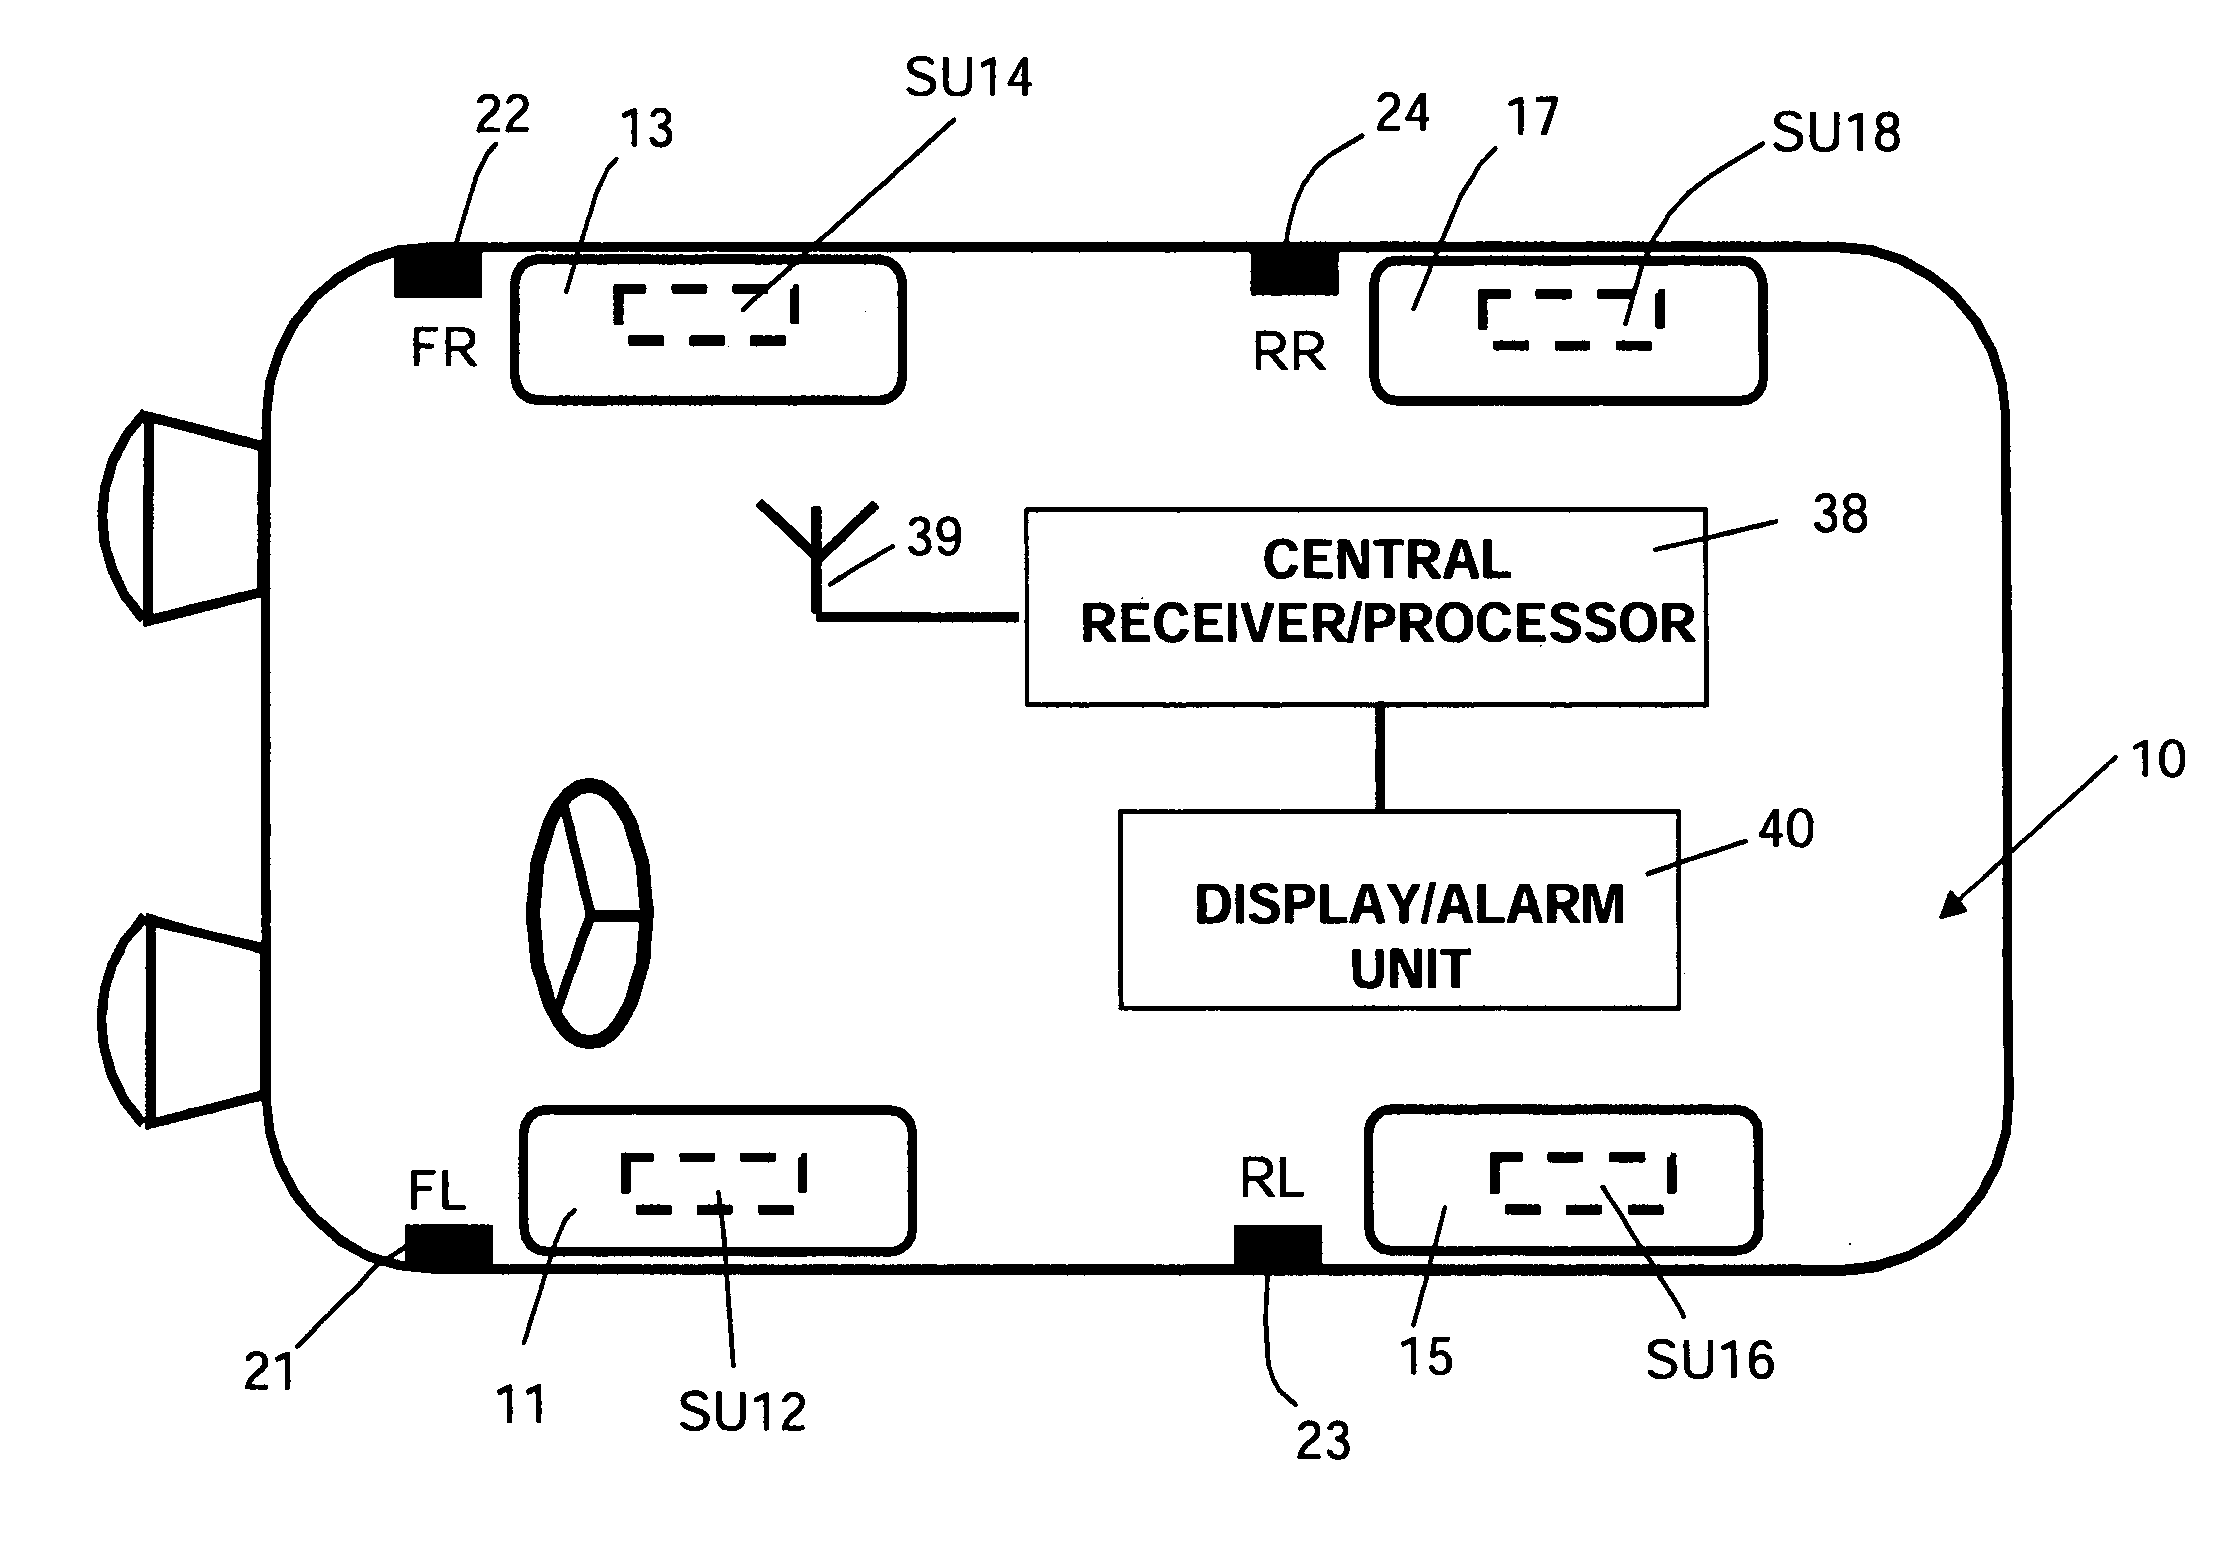 Tire parameter monitoring system with sensor location using RFID tags